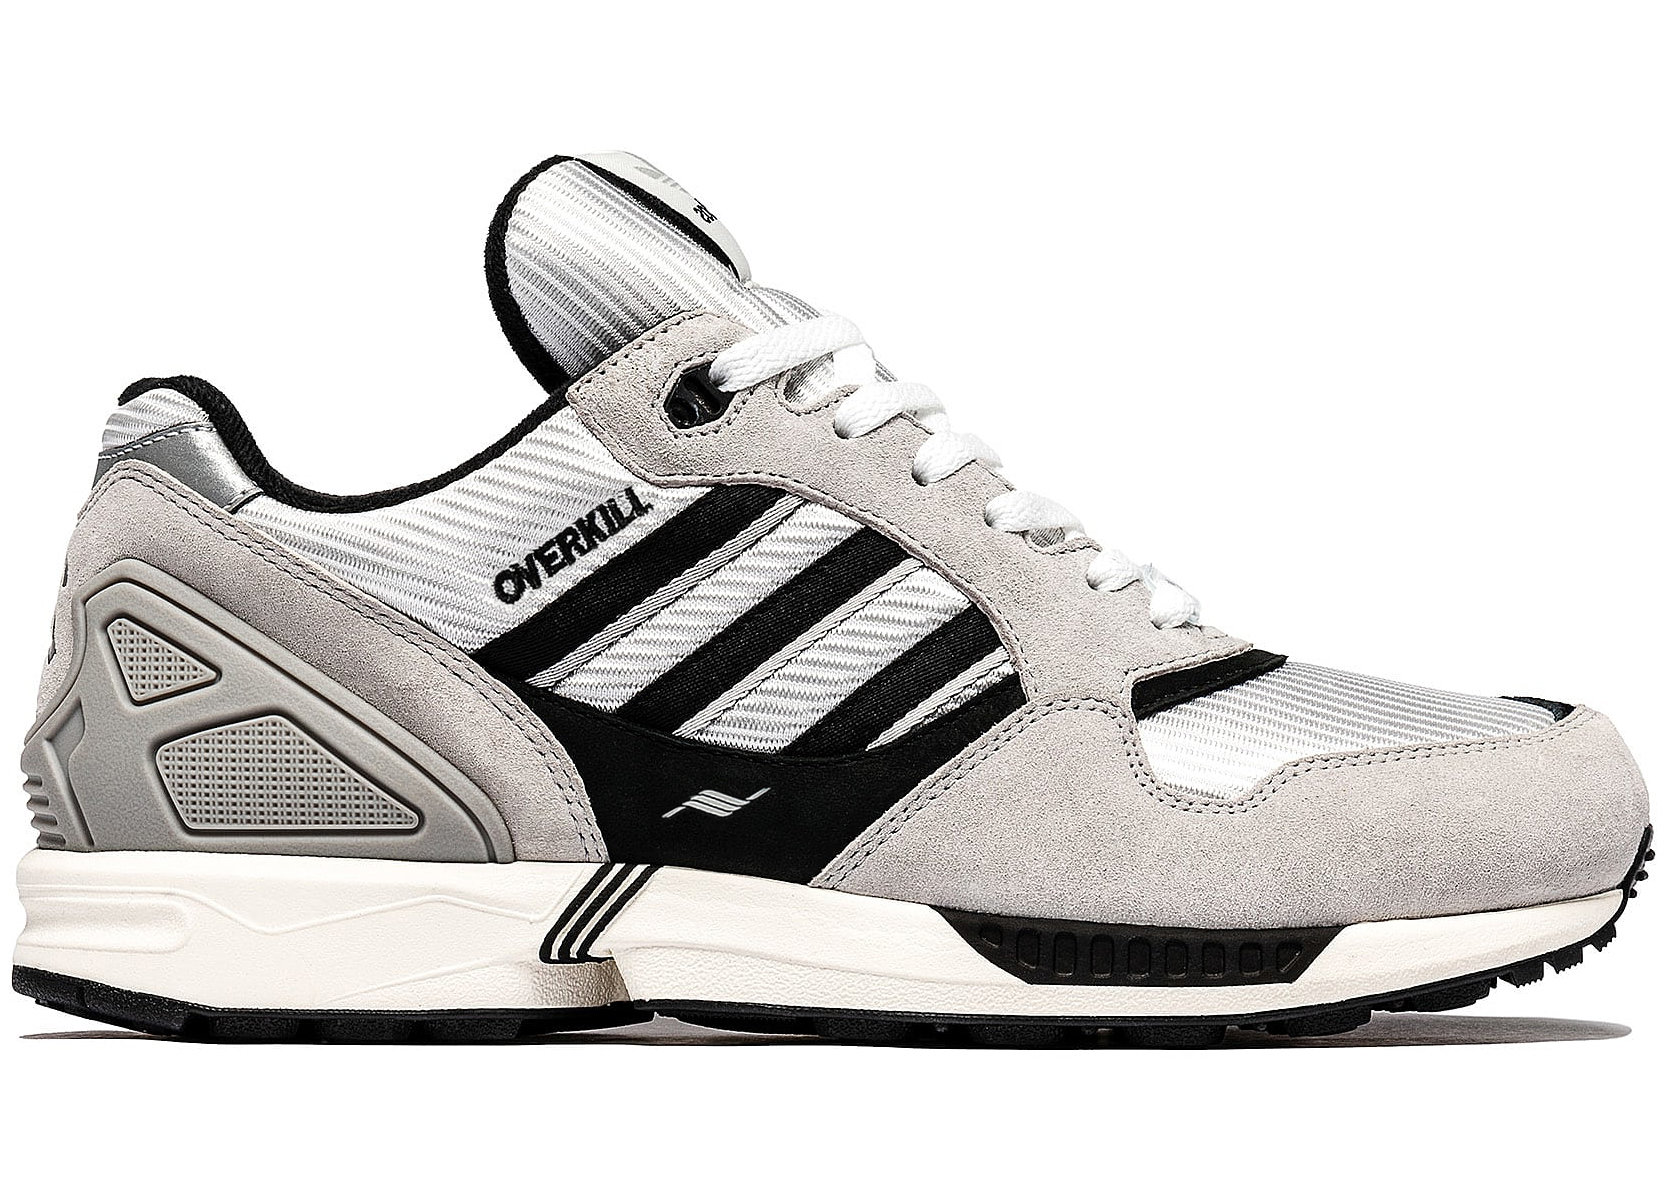 adidas ZX 6000 Overkill Friends and Family メンズ - ID3549 - JP